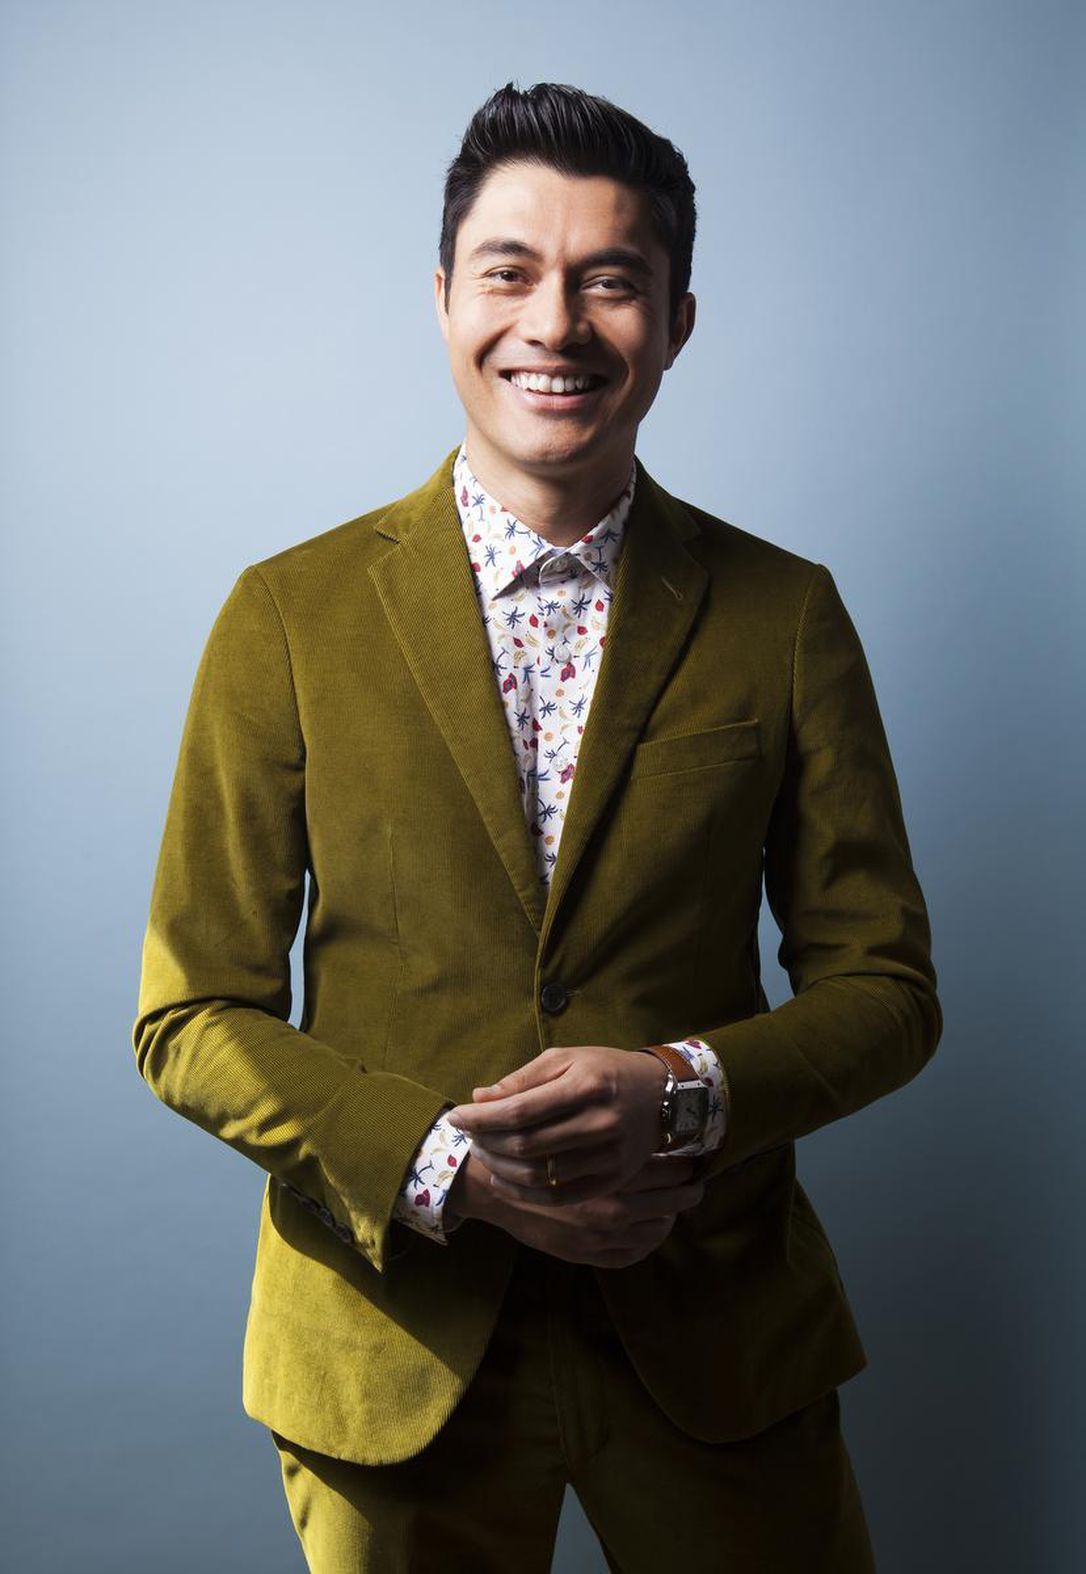 The wild ascent of Crazy Rich Asians star Henry Golding